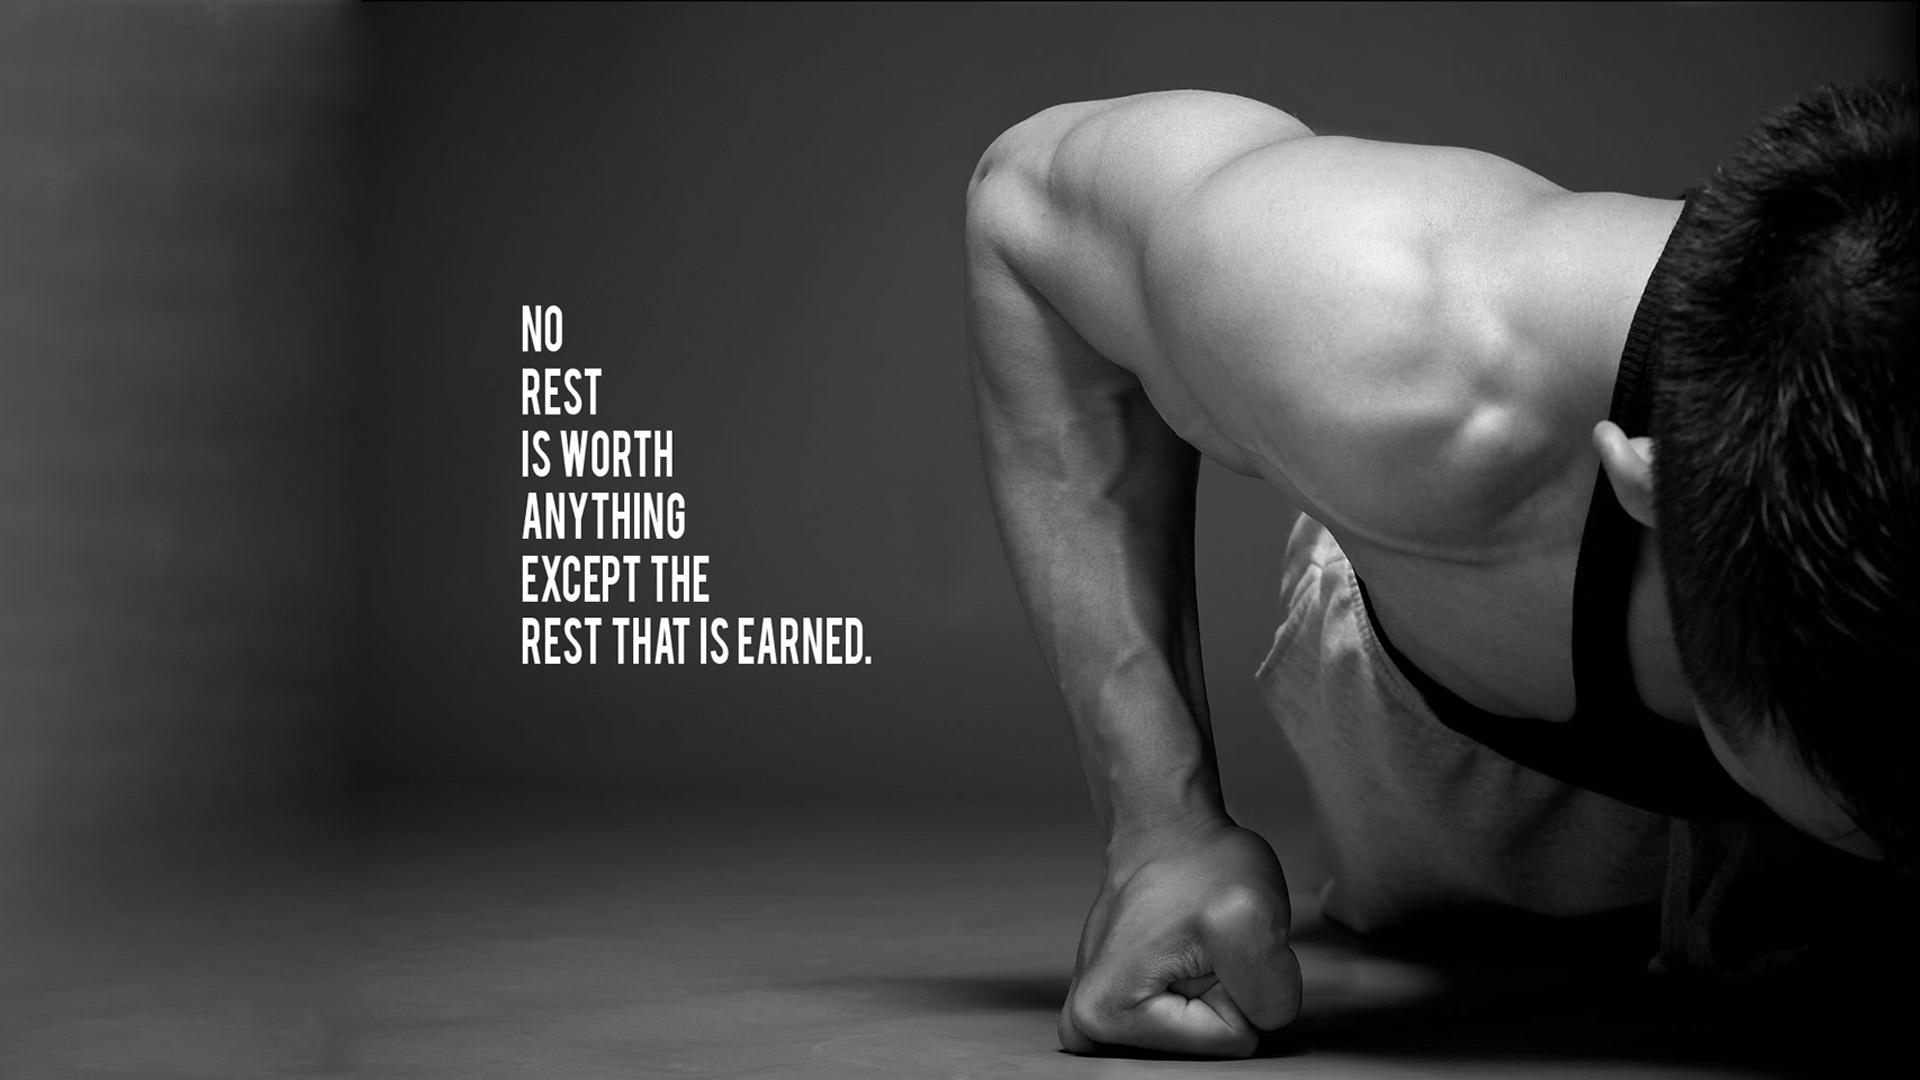 Wallpaper Categories 1920x1080 HD Fitness Quotes